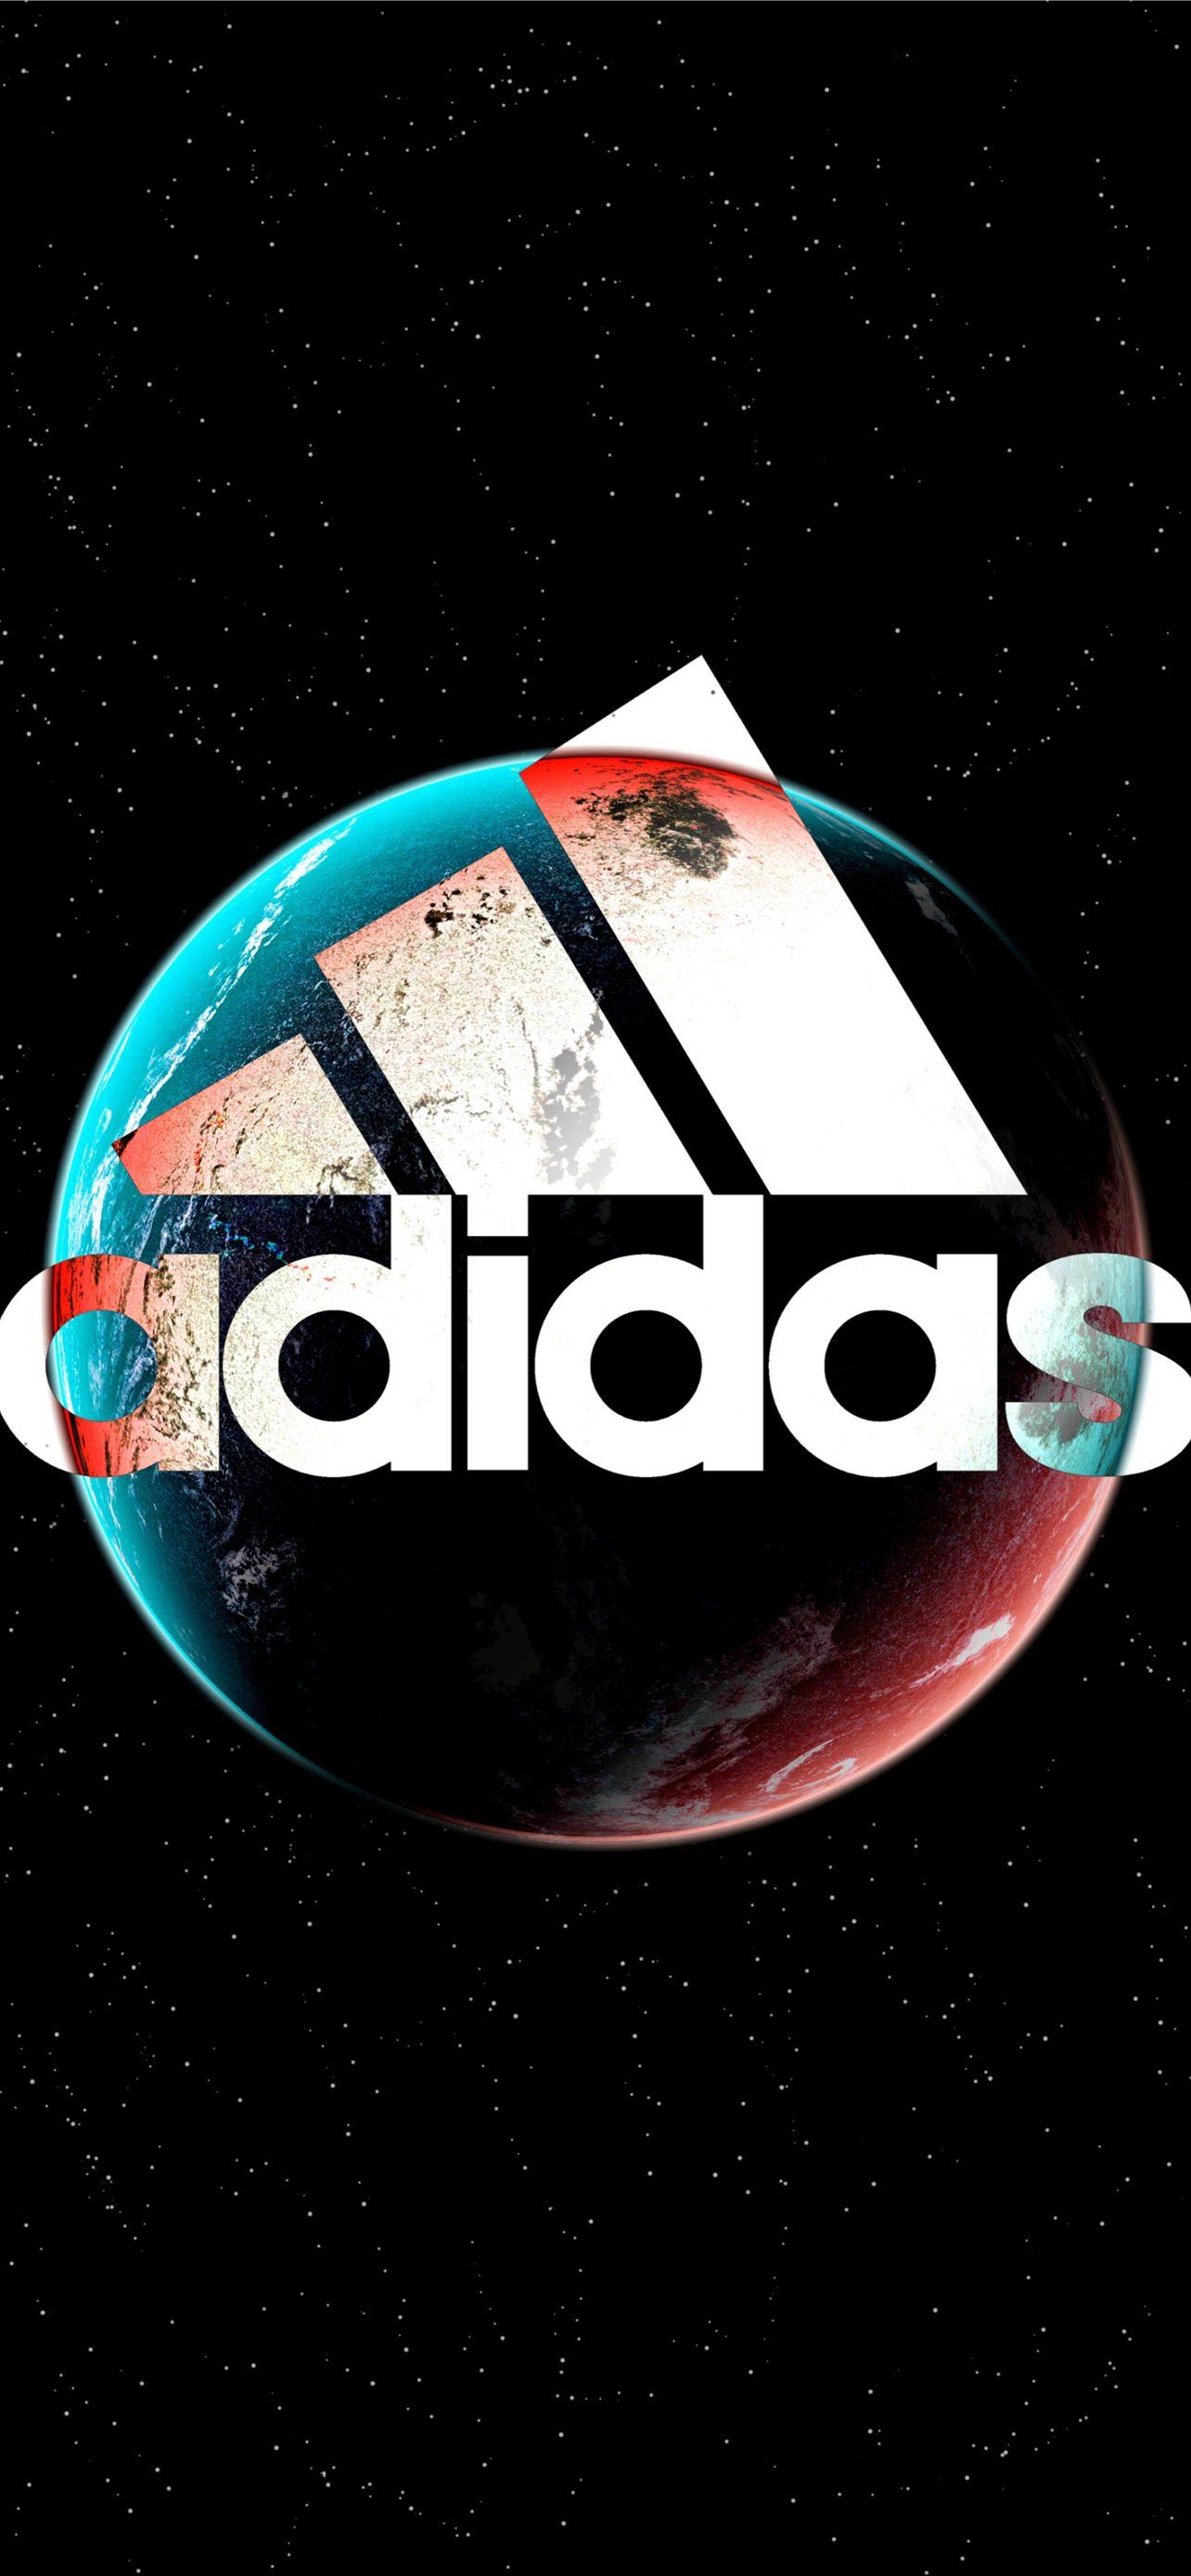 Adidas Lock Screen Logo Wallpaper For Iphone by lukejacobs02 on DeviantArt